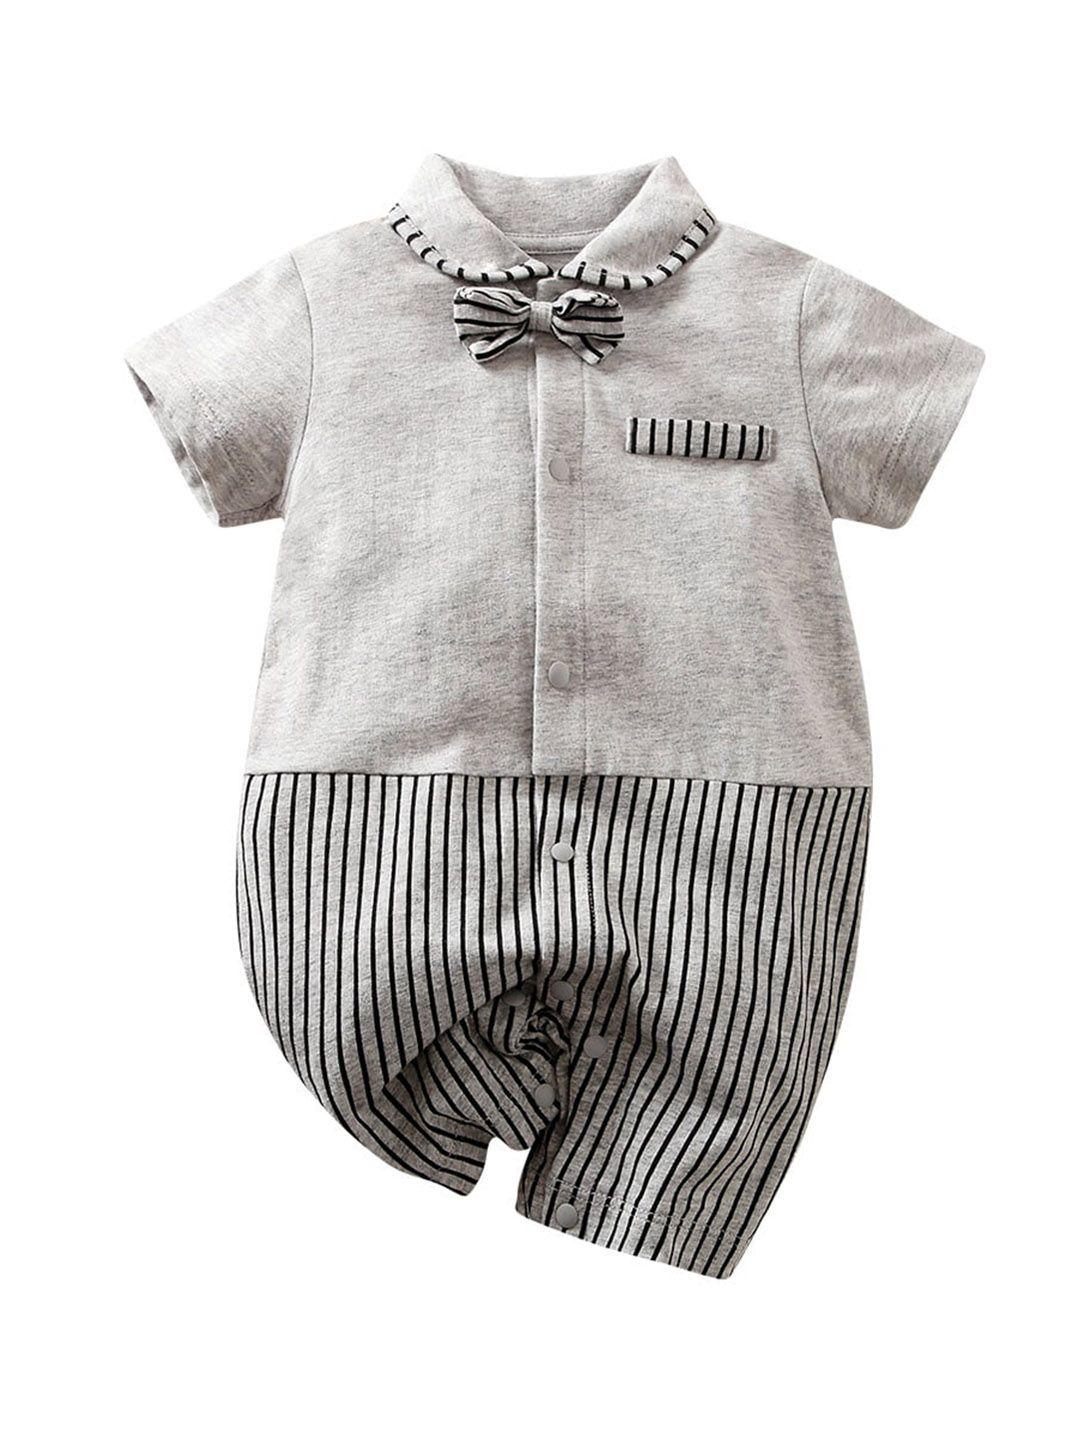 stylecast-grey-infant-boys-striped-short-sleeves-shirt-collar-cotton-rompers